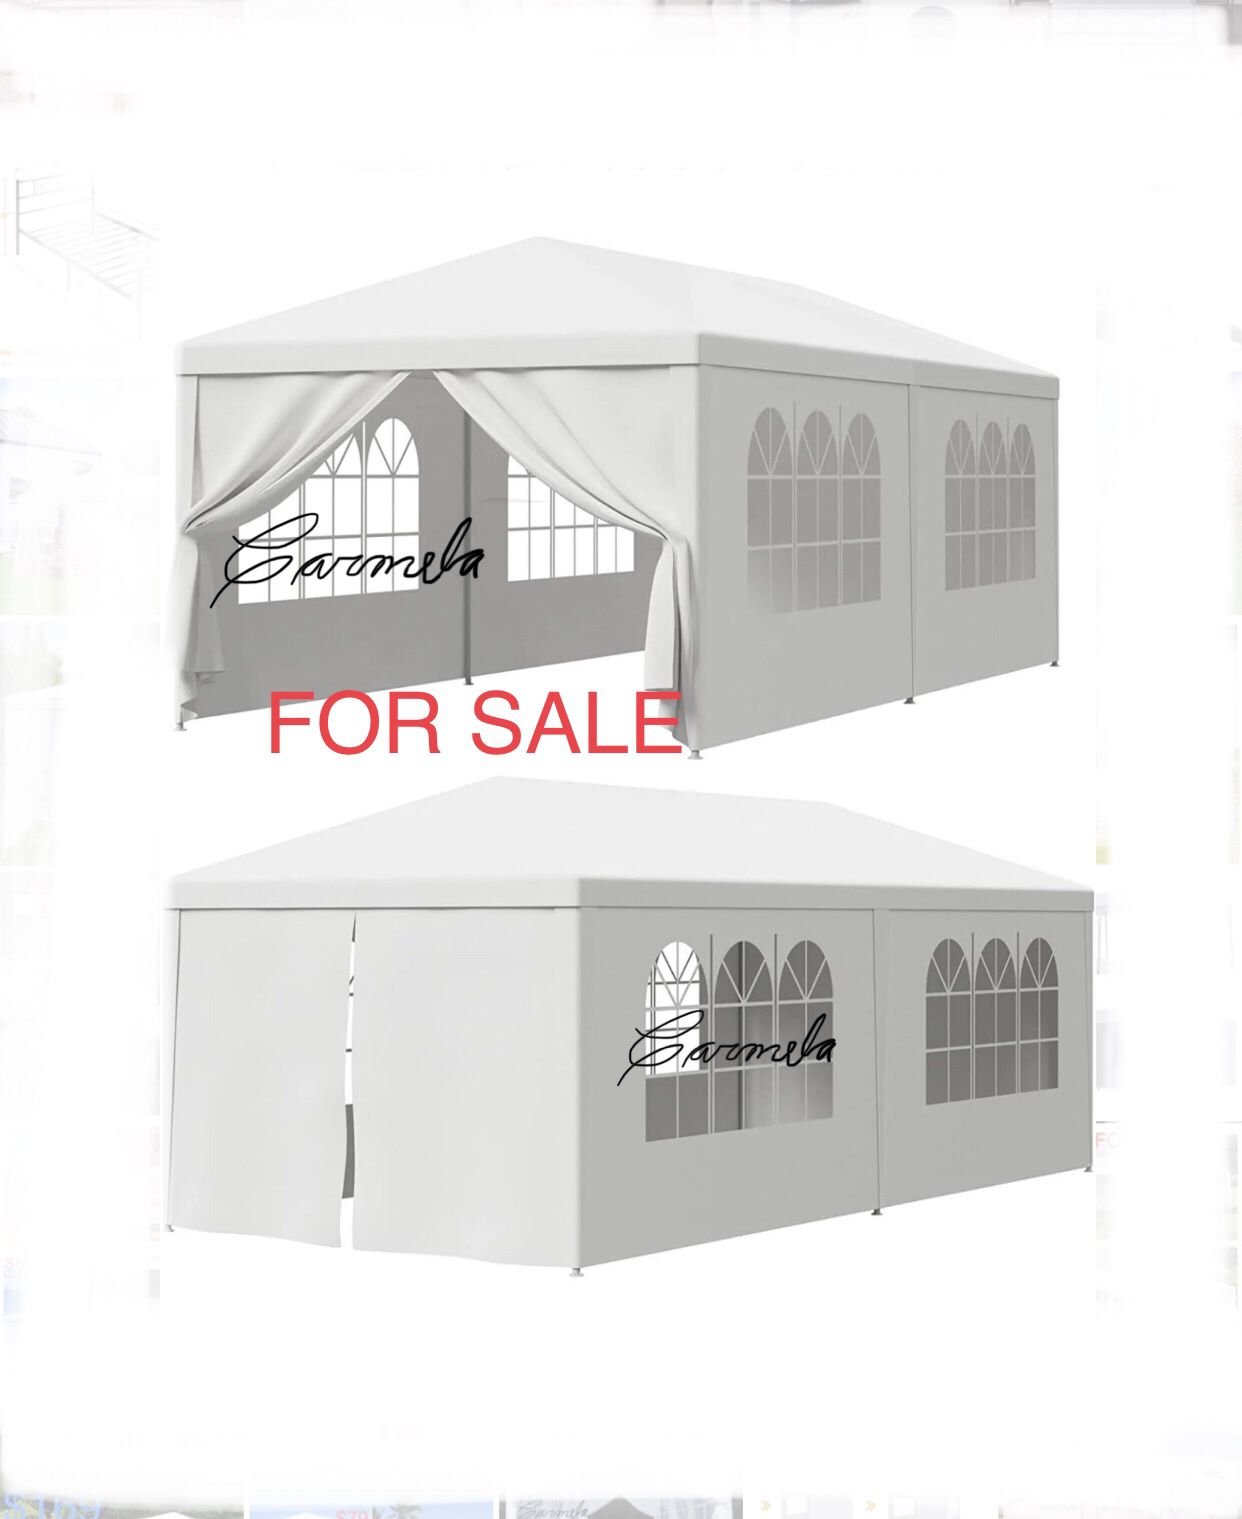 Canopy Party Tent,Carpa 10x20ft Canopy Tent with 6 Sidewalls Protable Tent for Parties Beach Camping